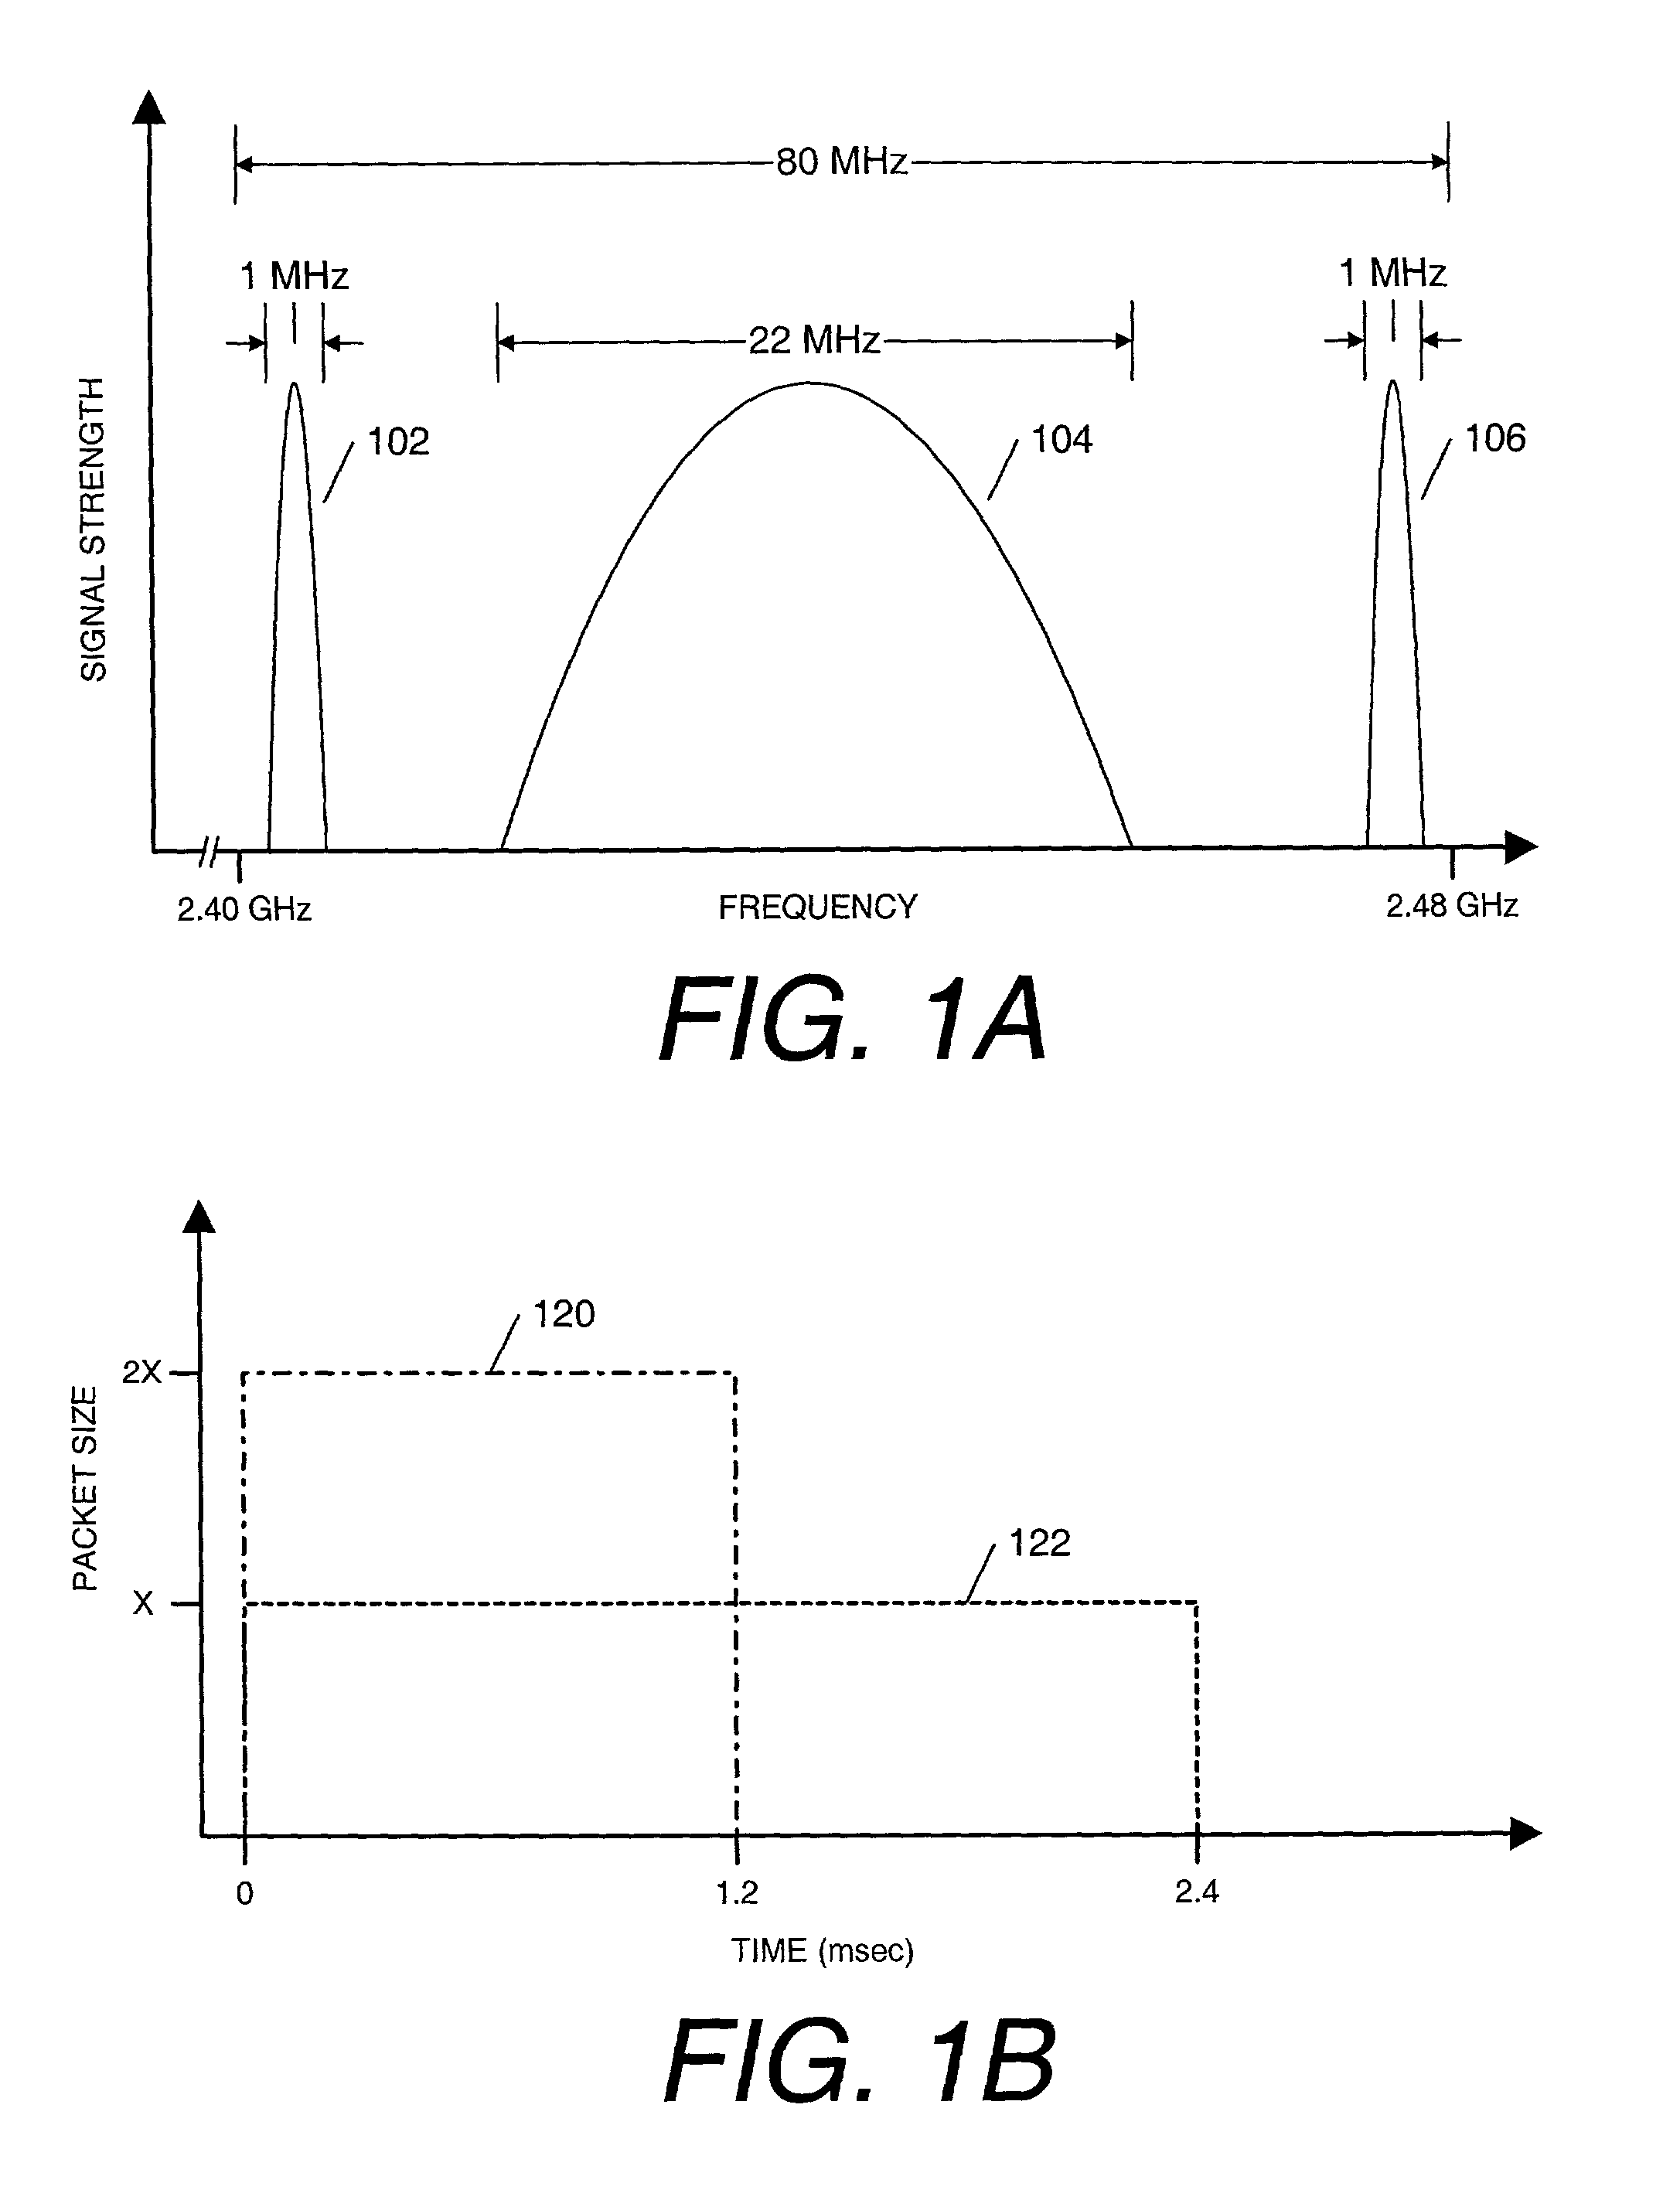 Increasing data throughput on a wireless local area network in the presence of intermittent interference